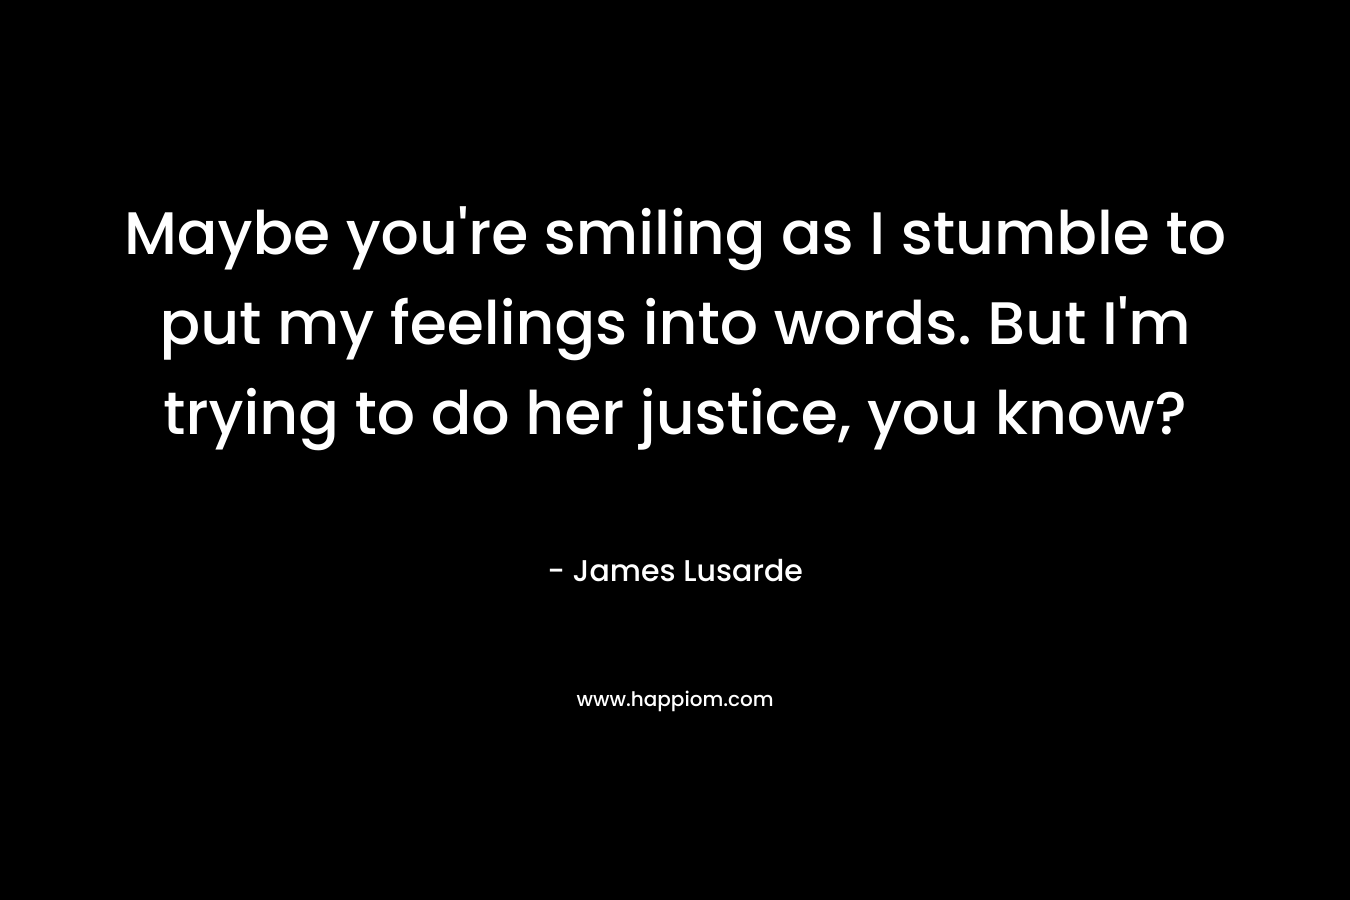 Maybe you’re smiling as I stumble to put my feelings into words. But I’m trying to do her justice, you know? – James Lusarde